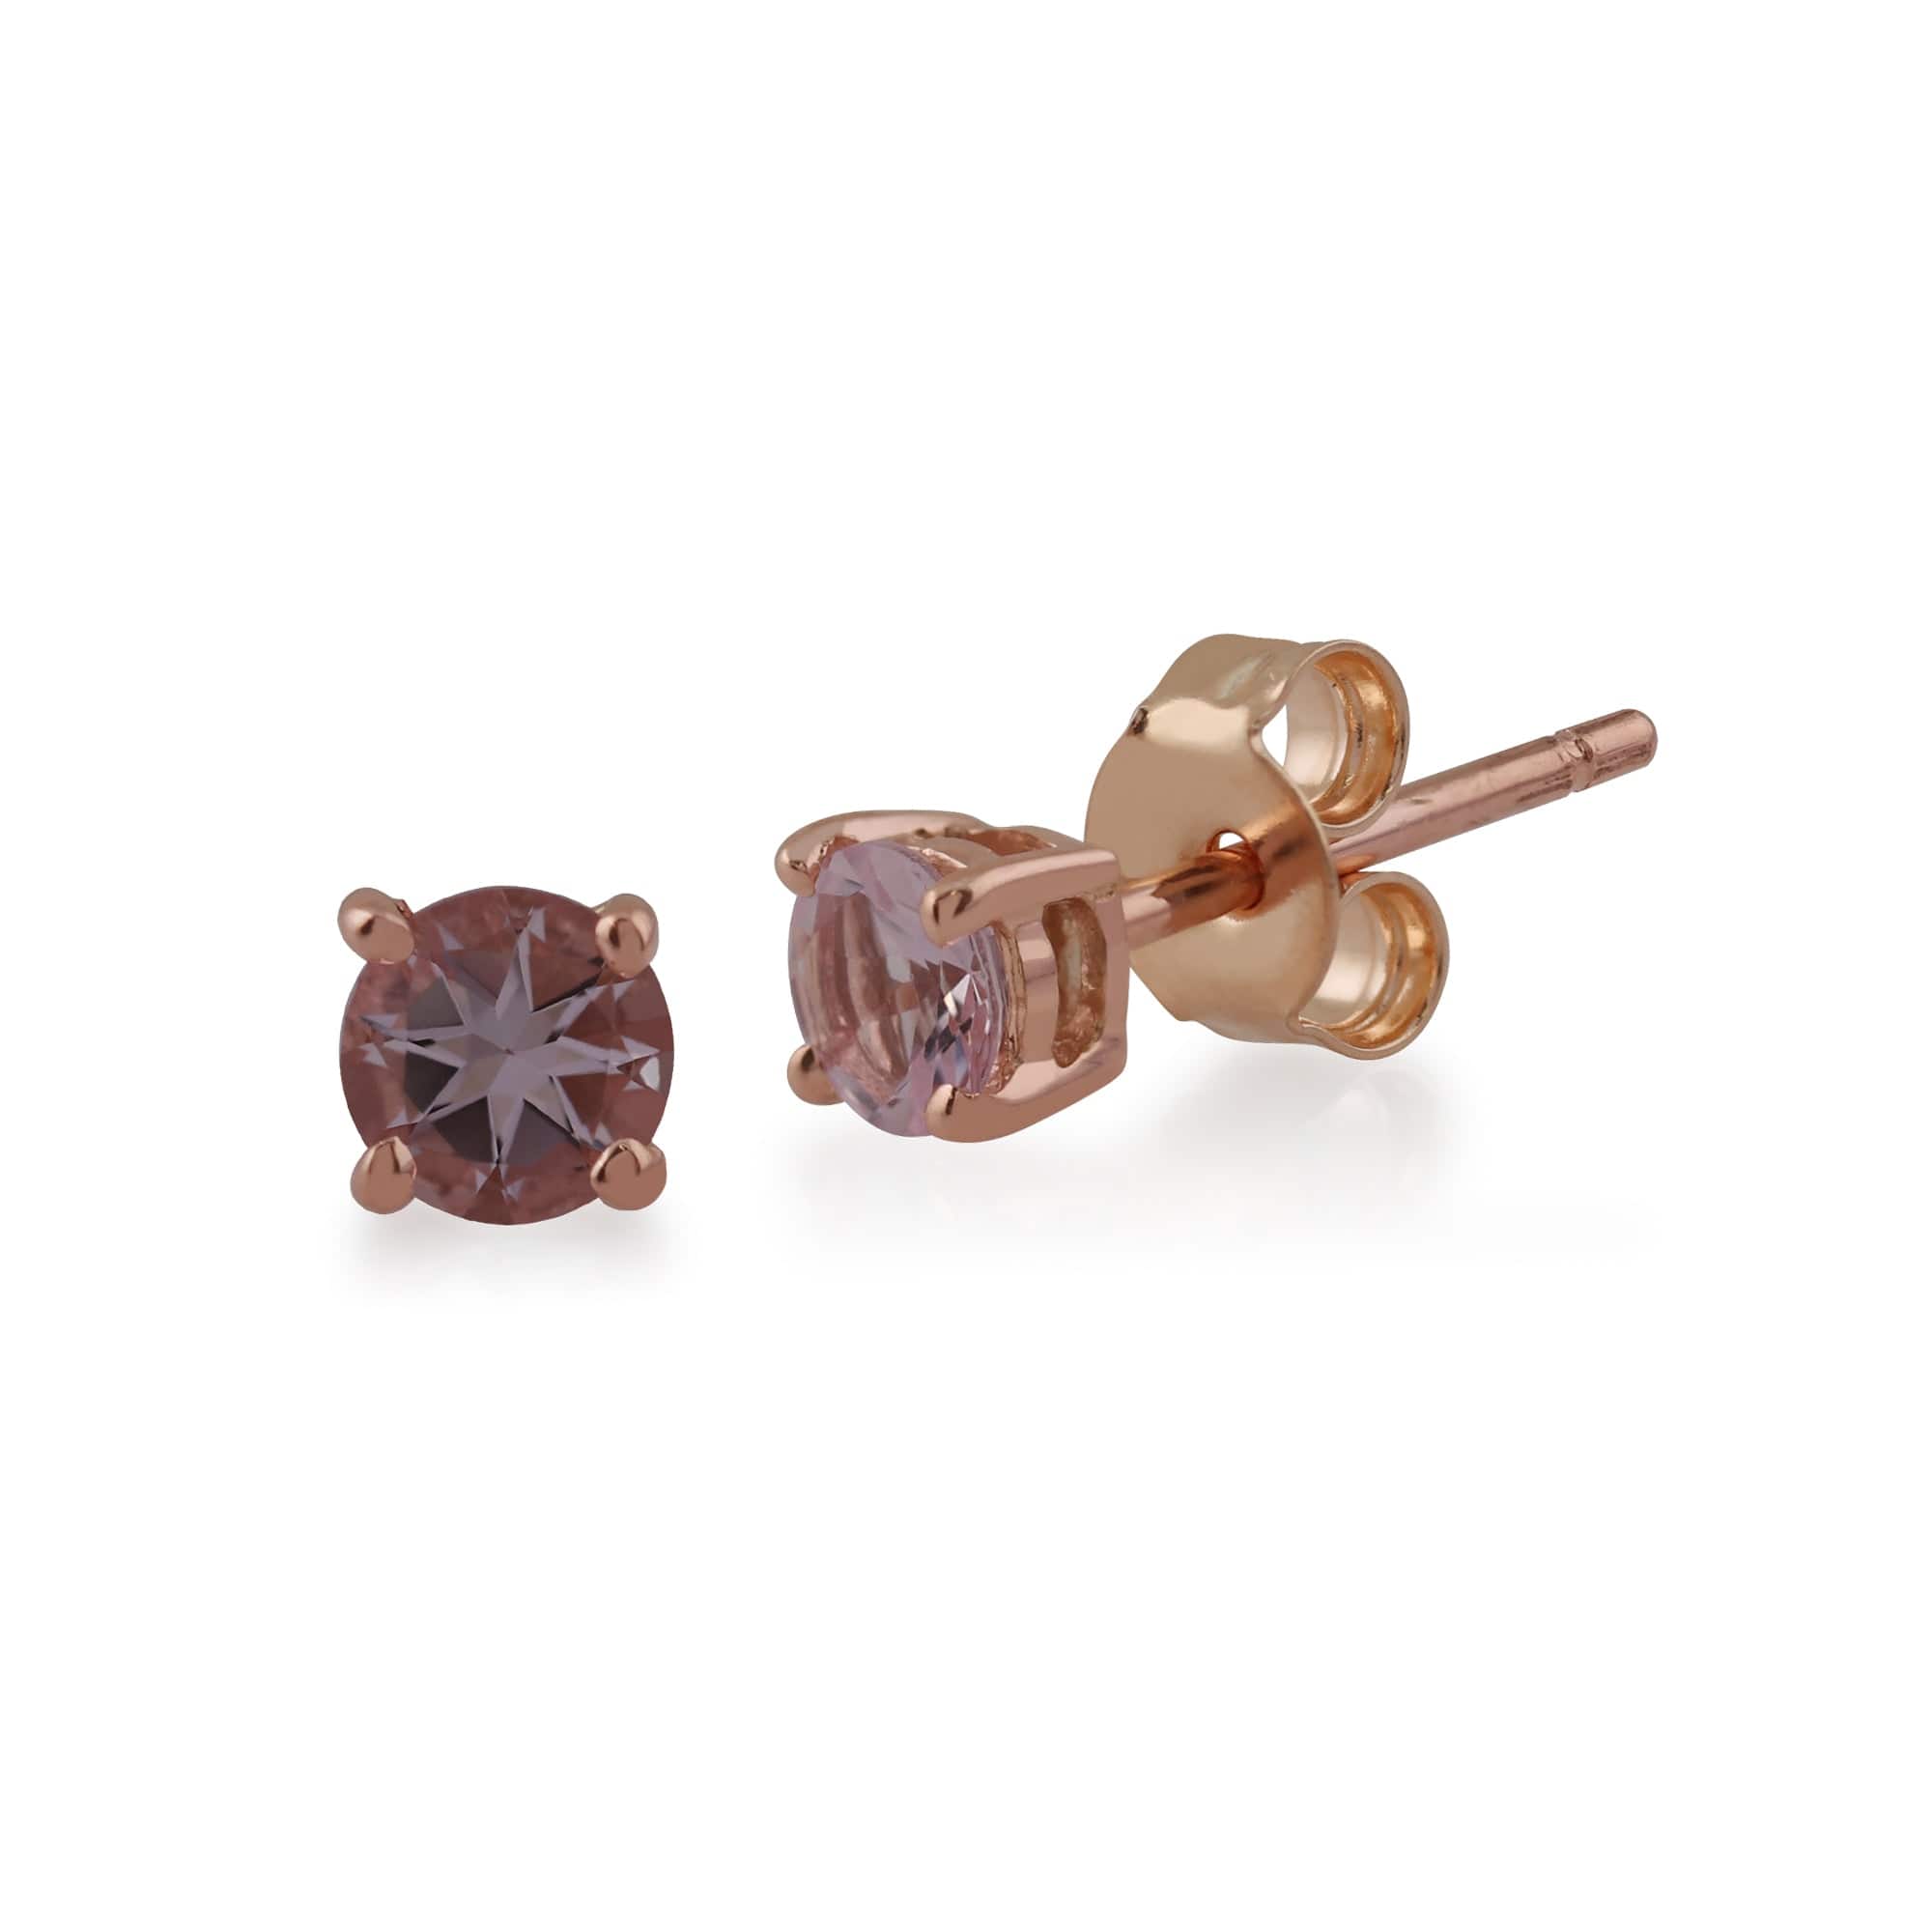 Classic Round Morganite Stud Earrings with Detachable Diamond Round Earrings Jacket Set in 9ct Rose Gold - Gemondo